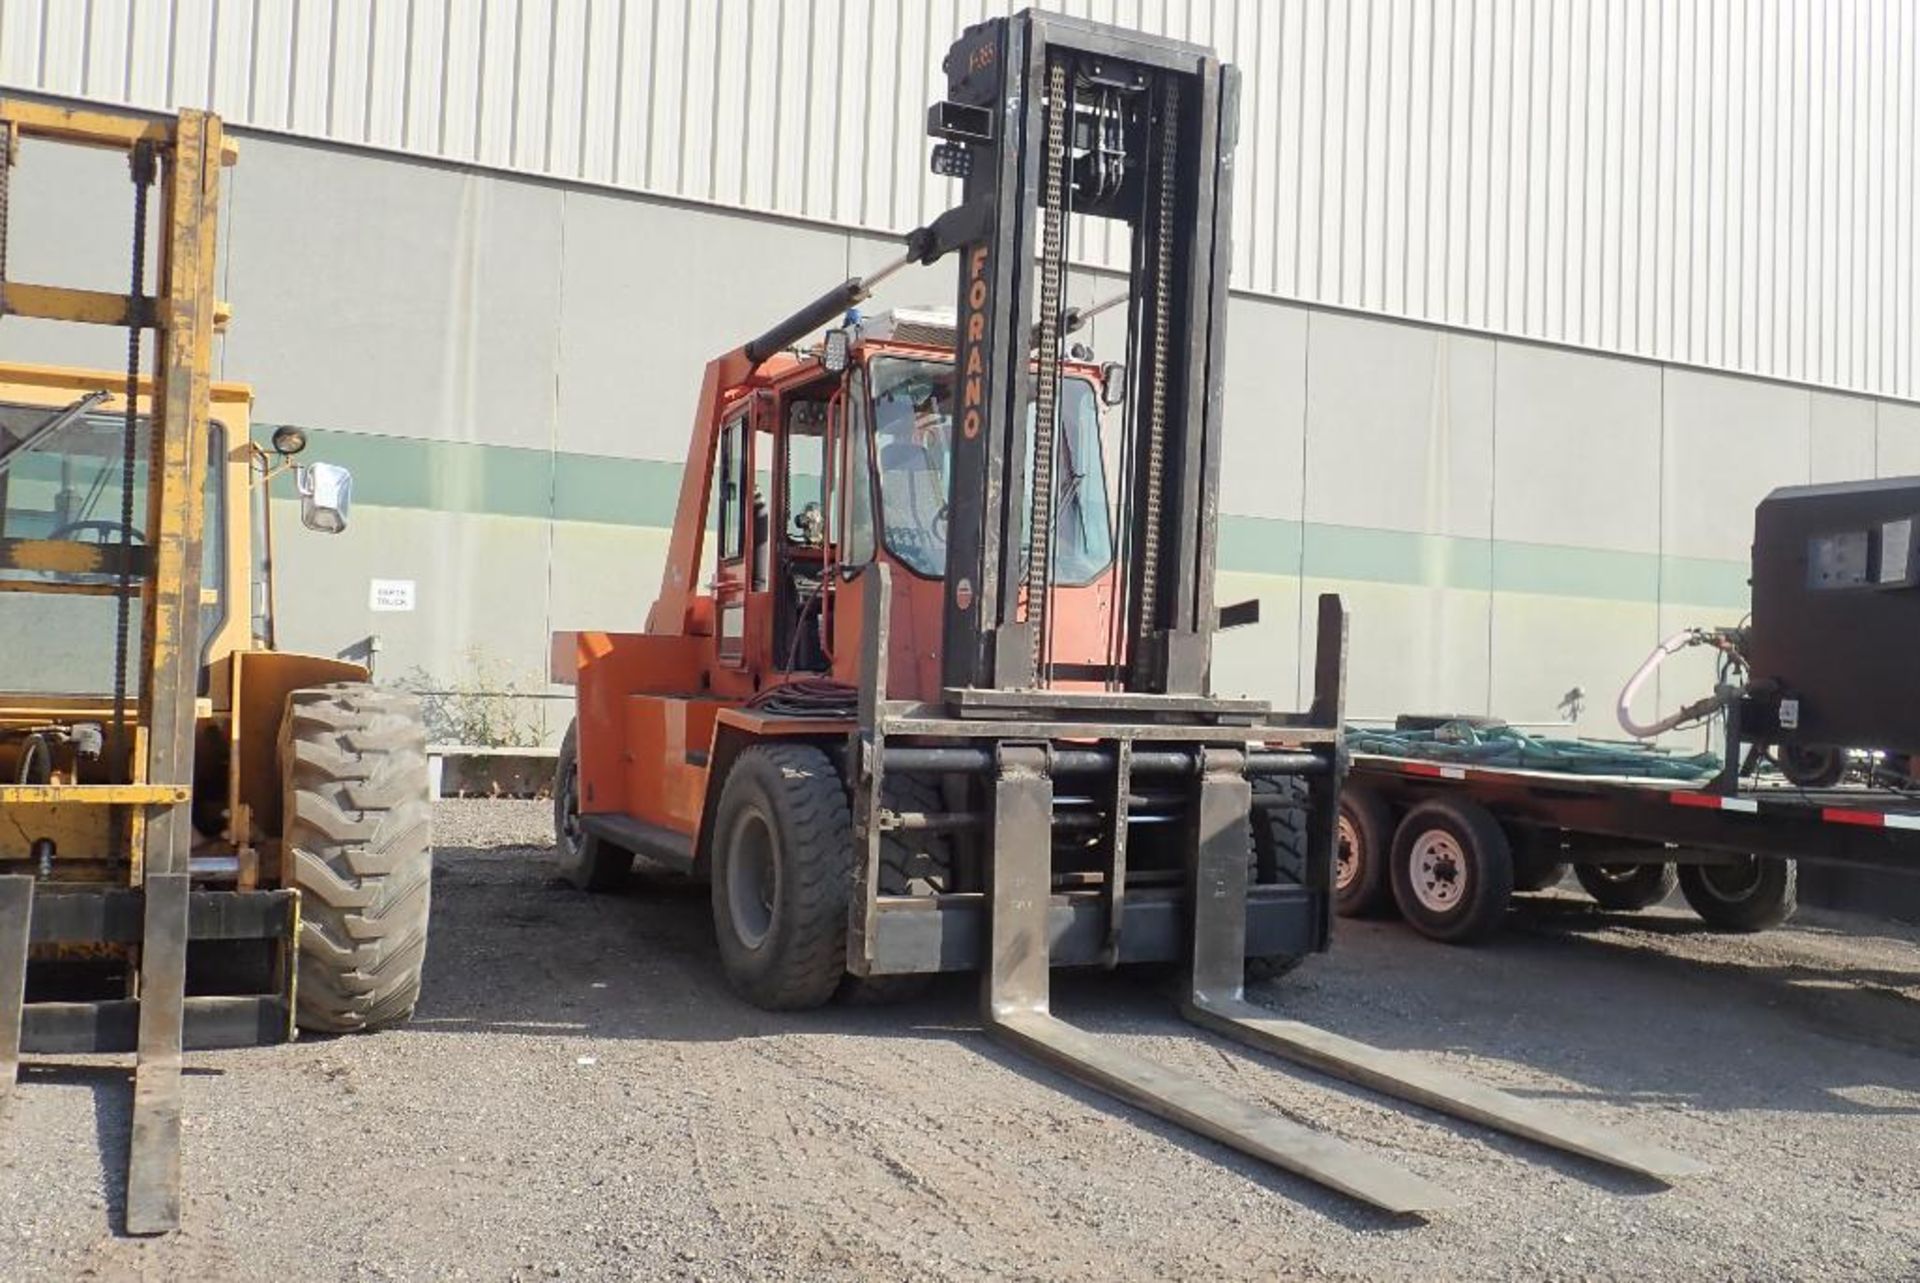 Forano F-355 Heavy Duty 35,500lbs Capacity Diesel Forklift. SN CE3550190010106. - Image 2 of 14